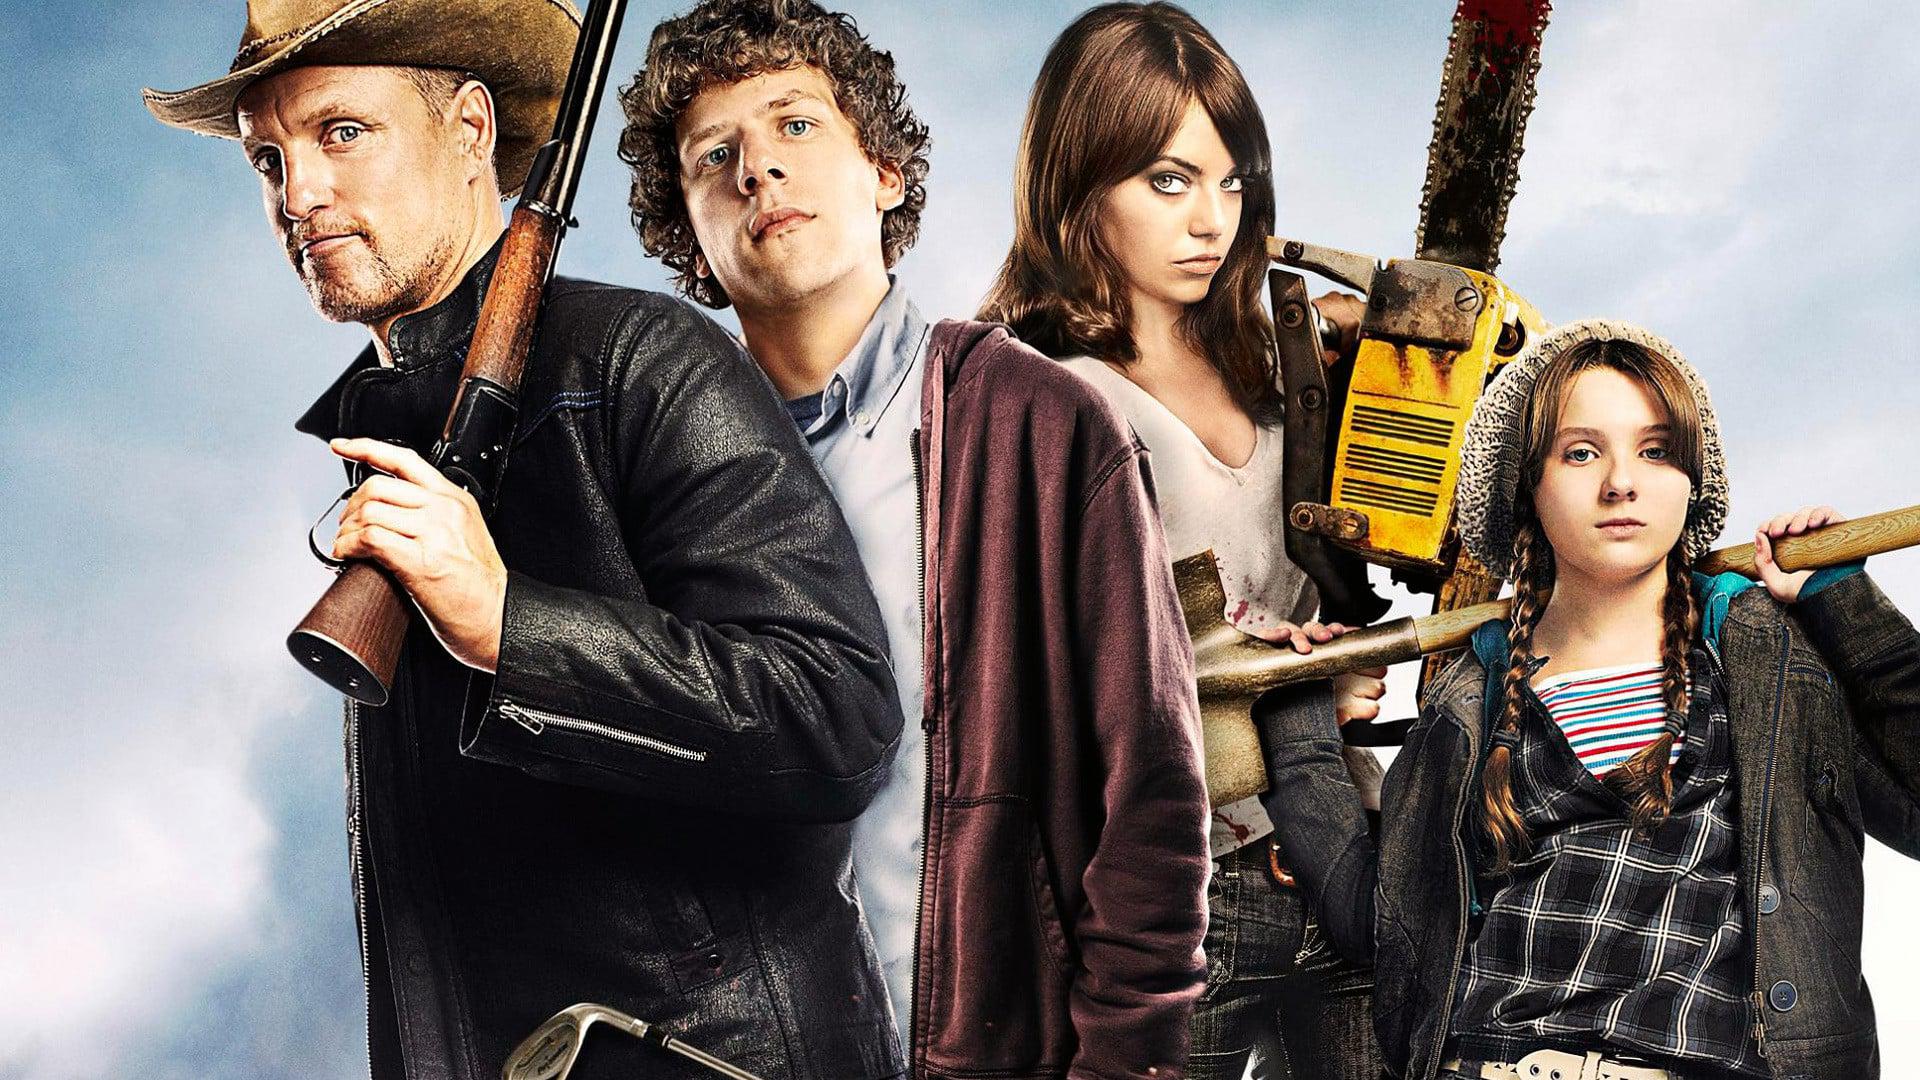 Backdrop Image for Zombieland